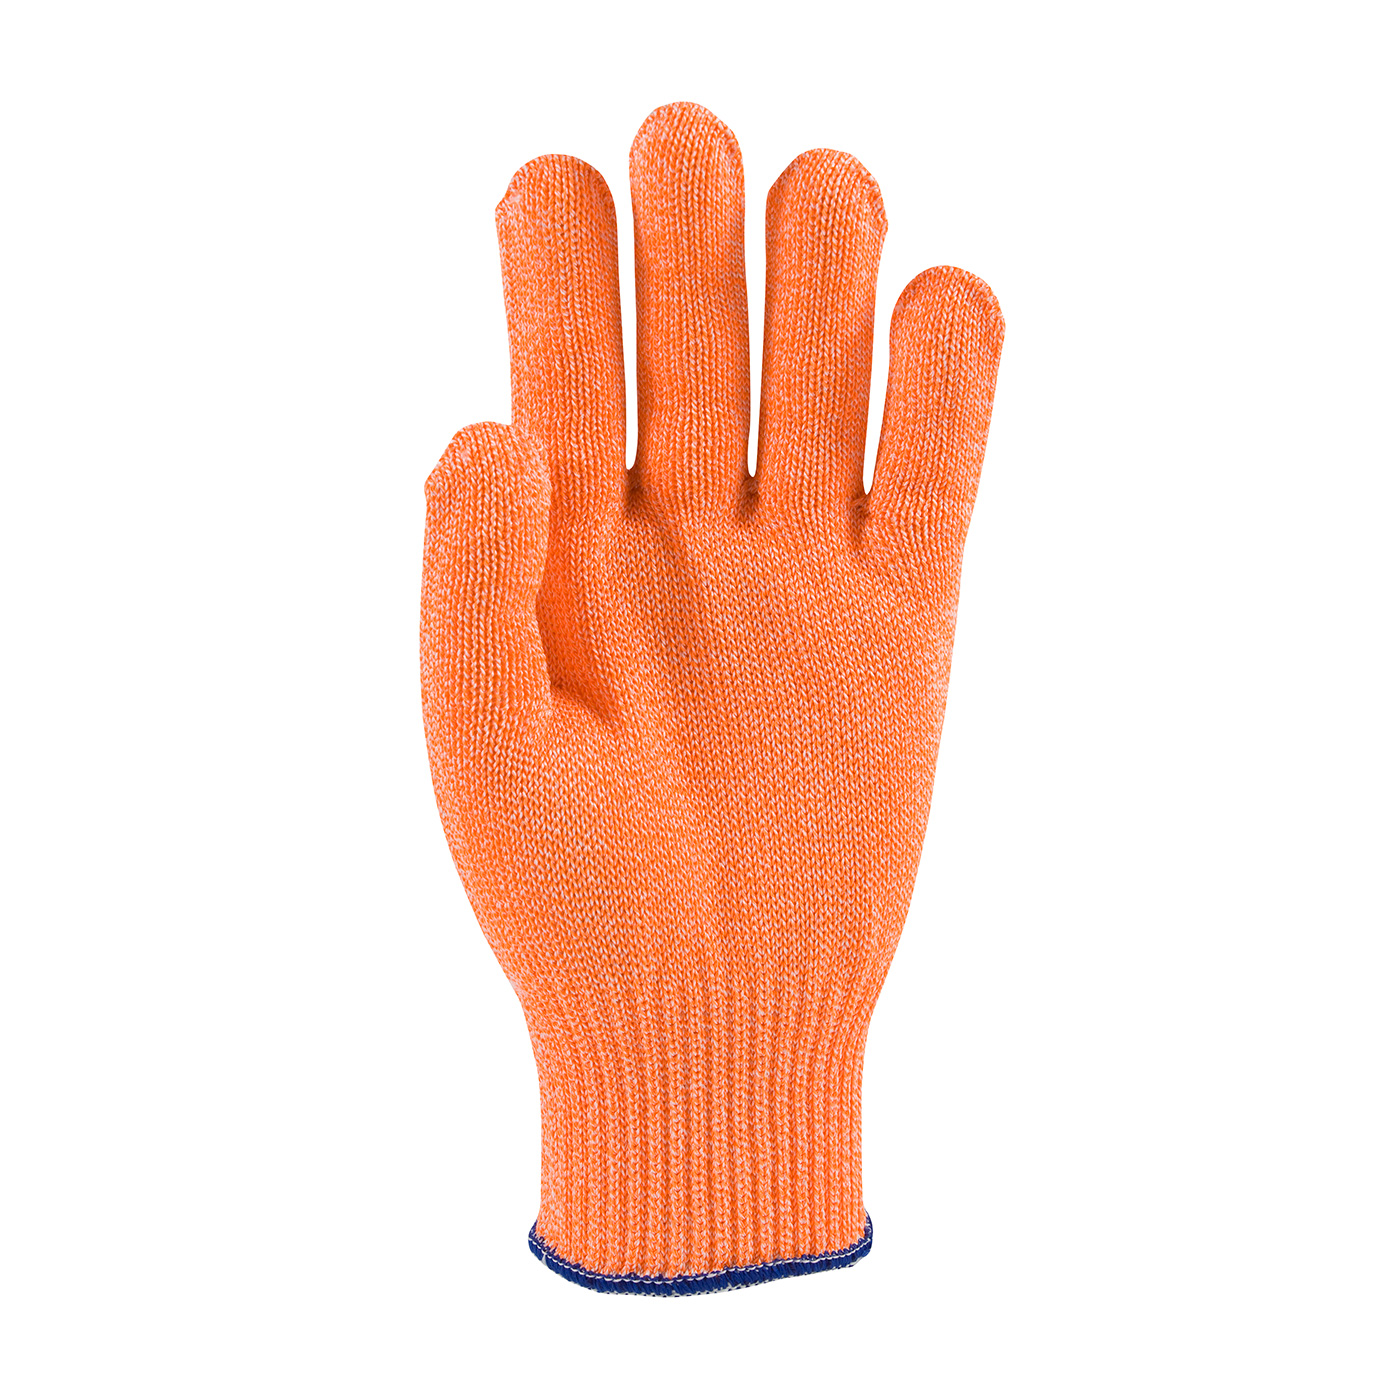 22-760OR PIP® Orange Claw Cover® Seamless Knit Dyneema® Blended Antimicrobial Glove - Medium Weight